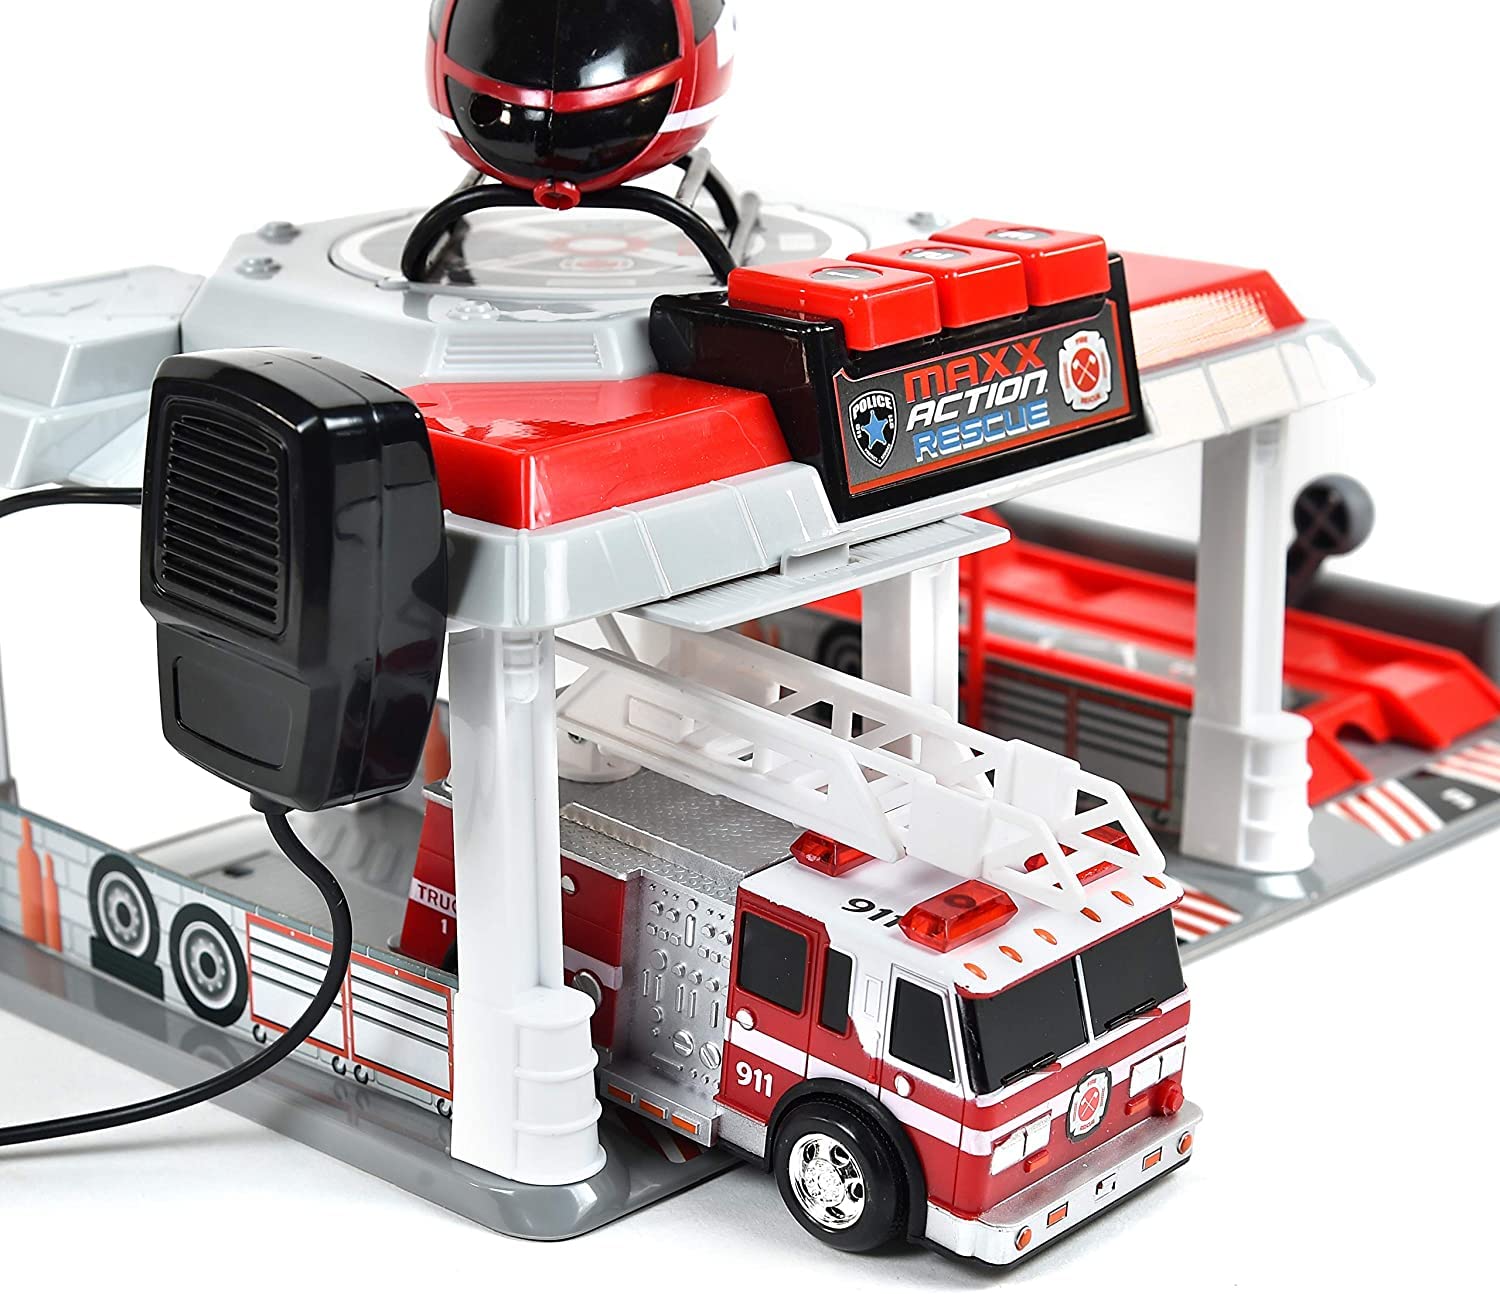 Fire and Rescue Garage Lights and Sounds Toy Set for Kids | Working Intercom with Open and Close Parking Garage and Vehicle Lift | Playset Includes Helicopter and Fire Truck with Friction Motor